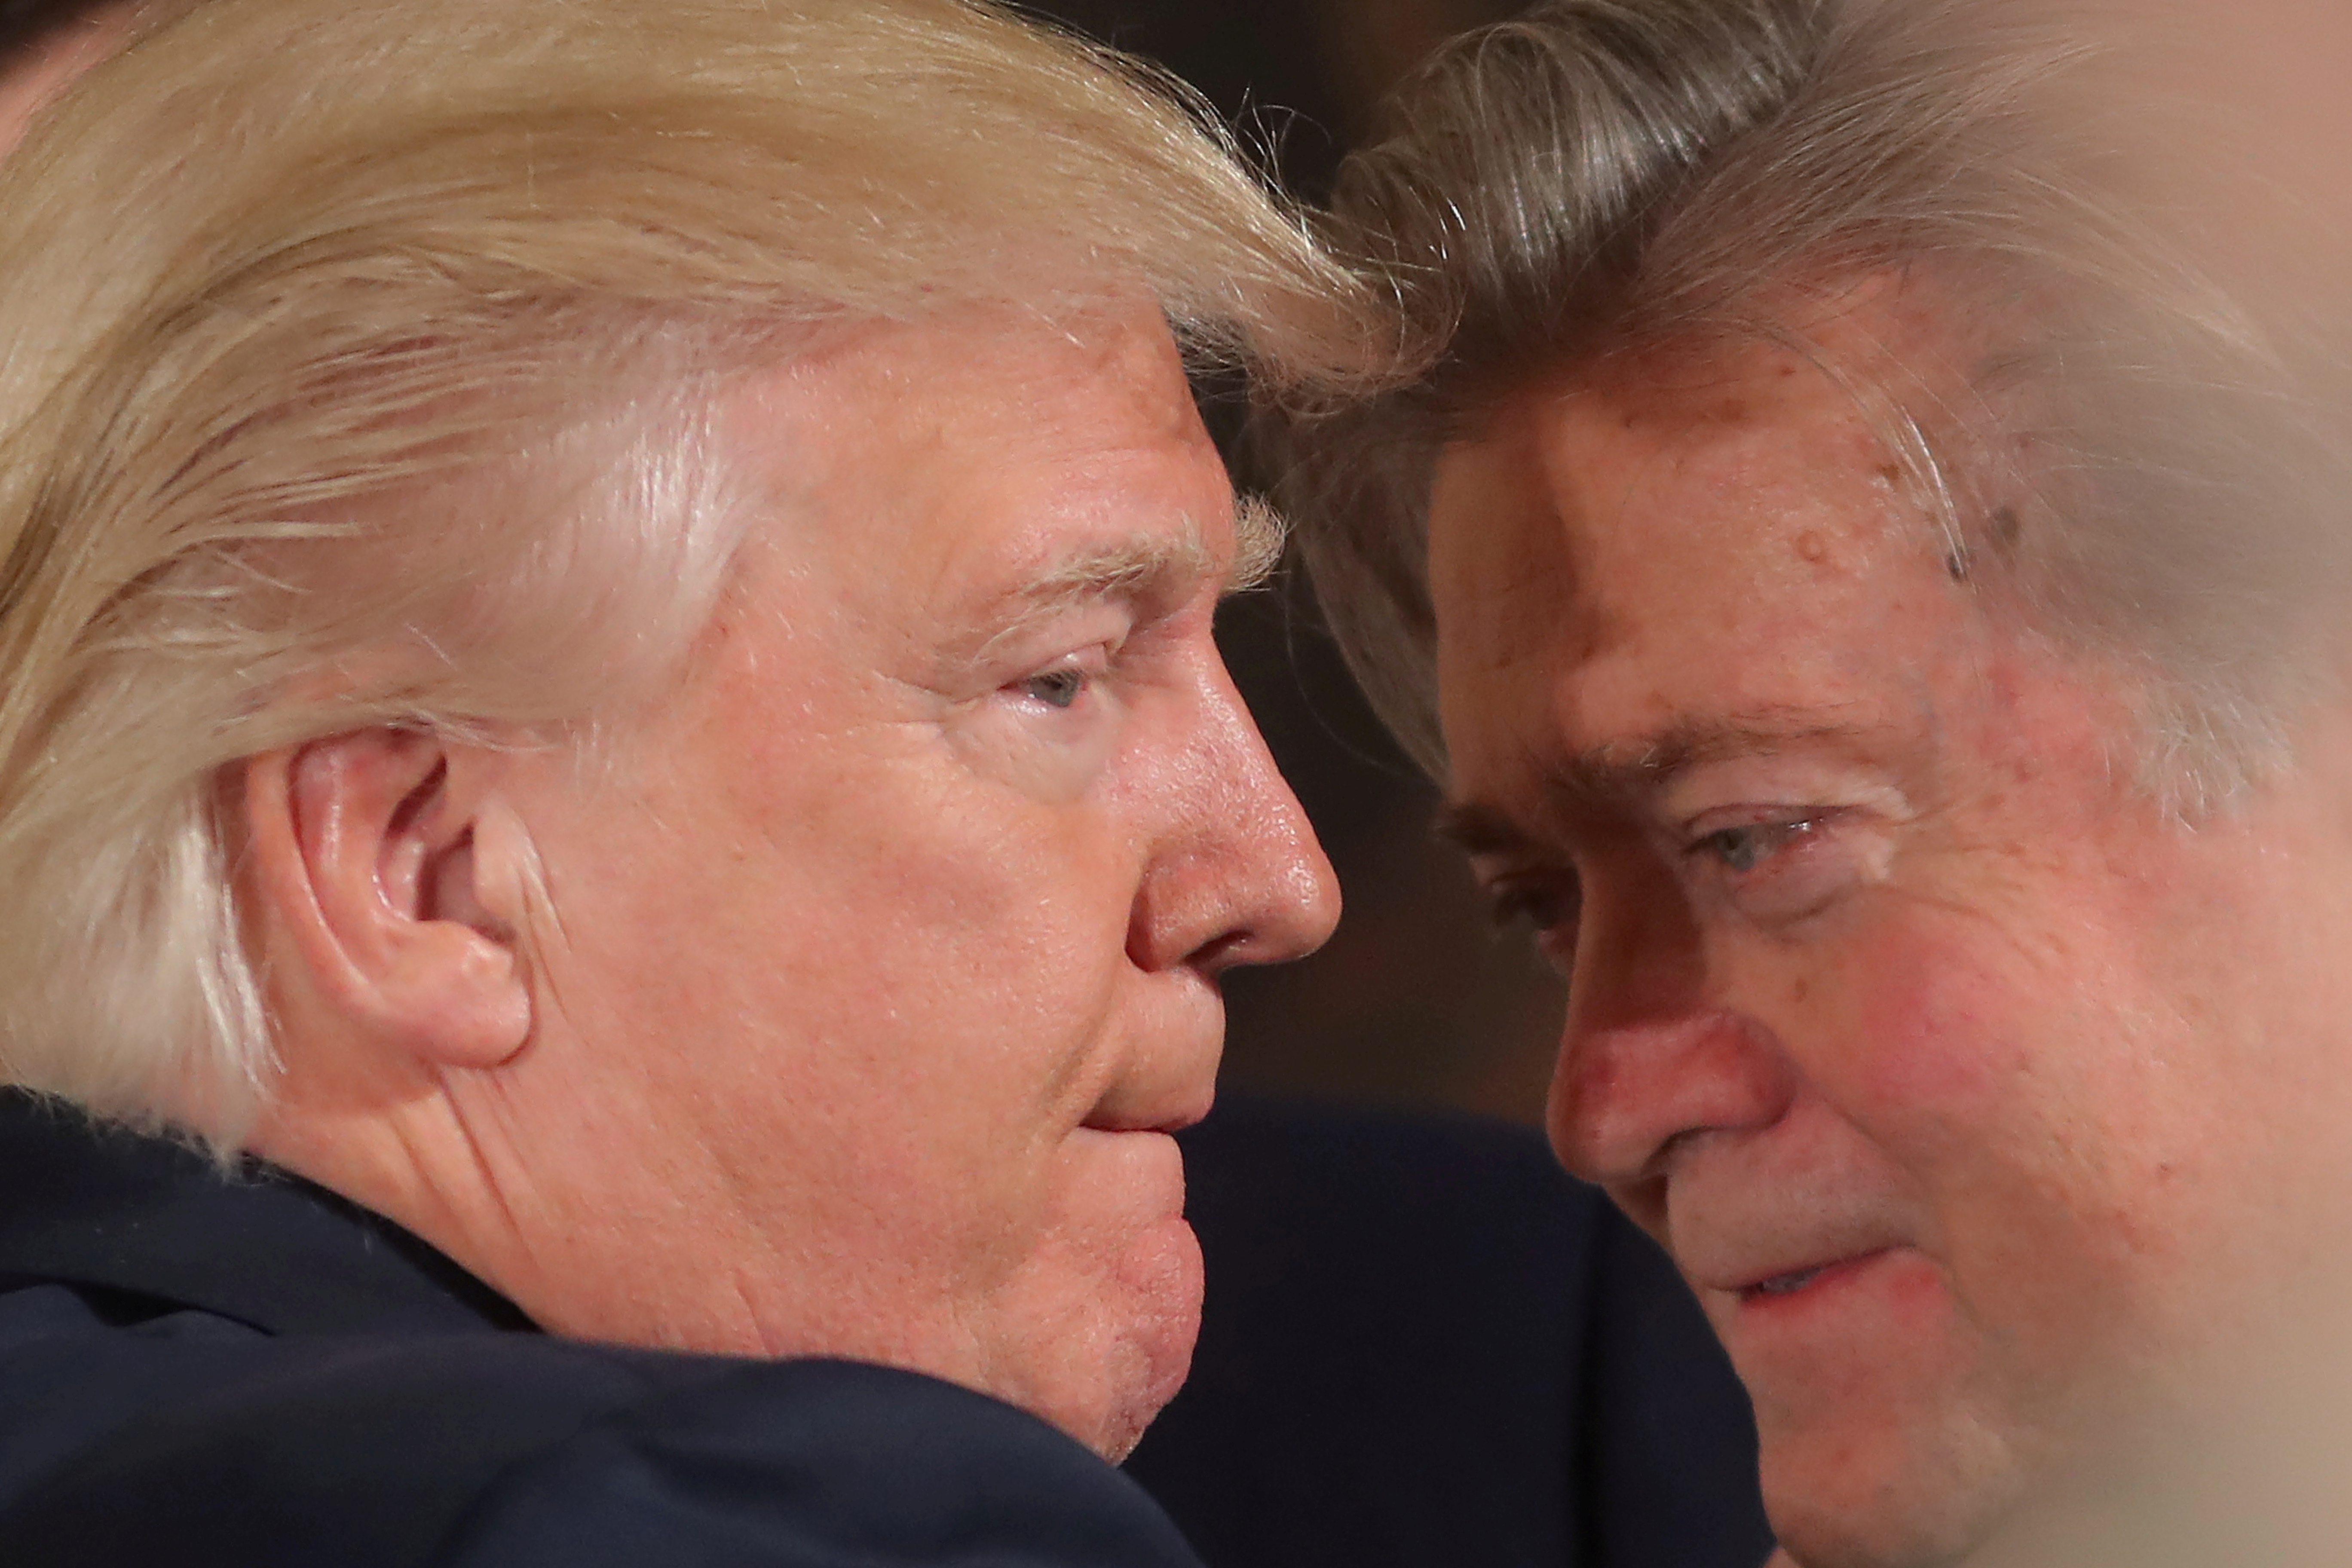 File photo  U.S. President Donald Trump talks to chief strategist Steve Bannon during a swearing in ceremony for senior staff at the White House in Washington, U.S. January 22, 2017. REUTERS/Carlos Barria